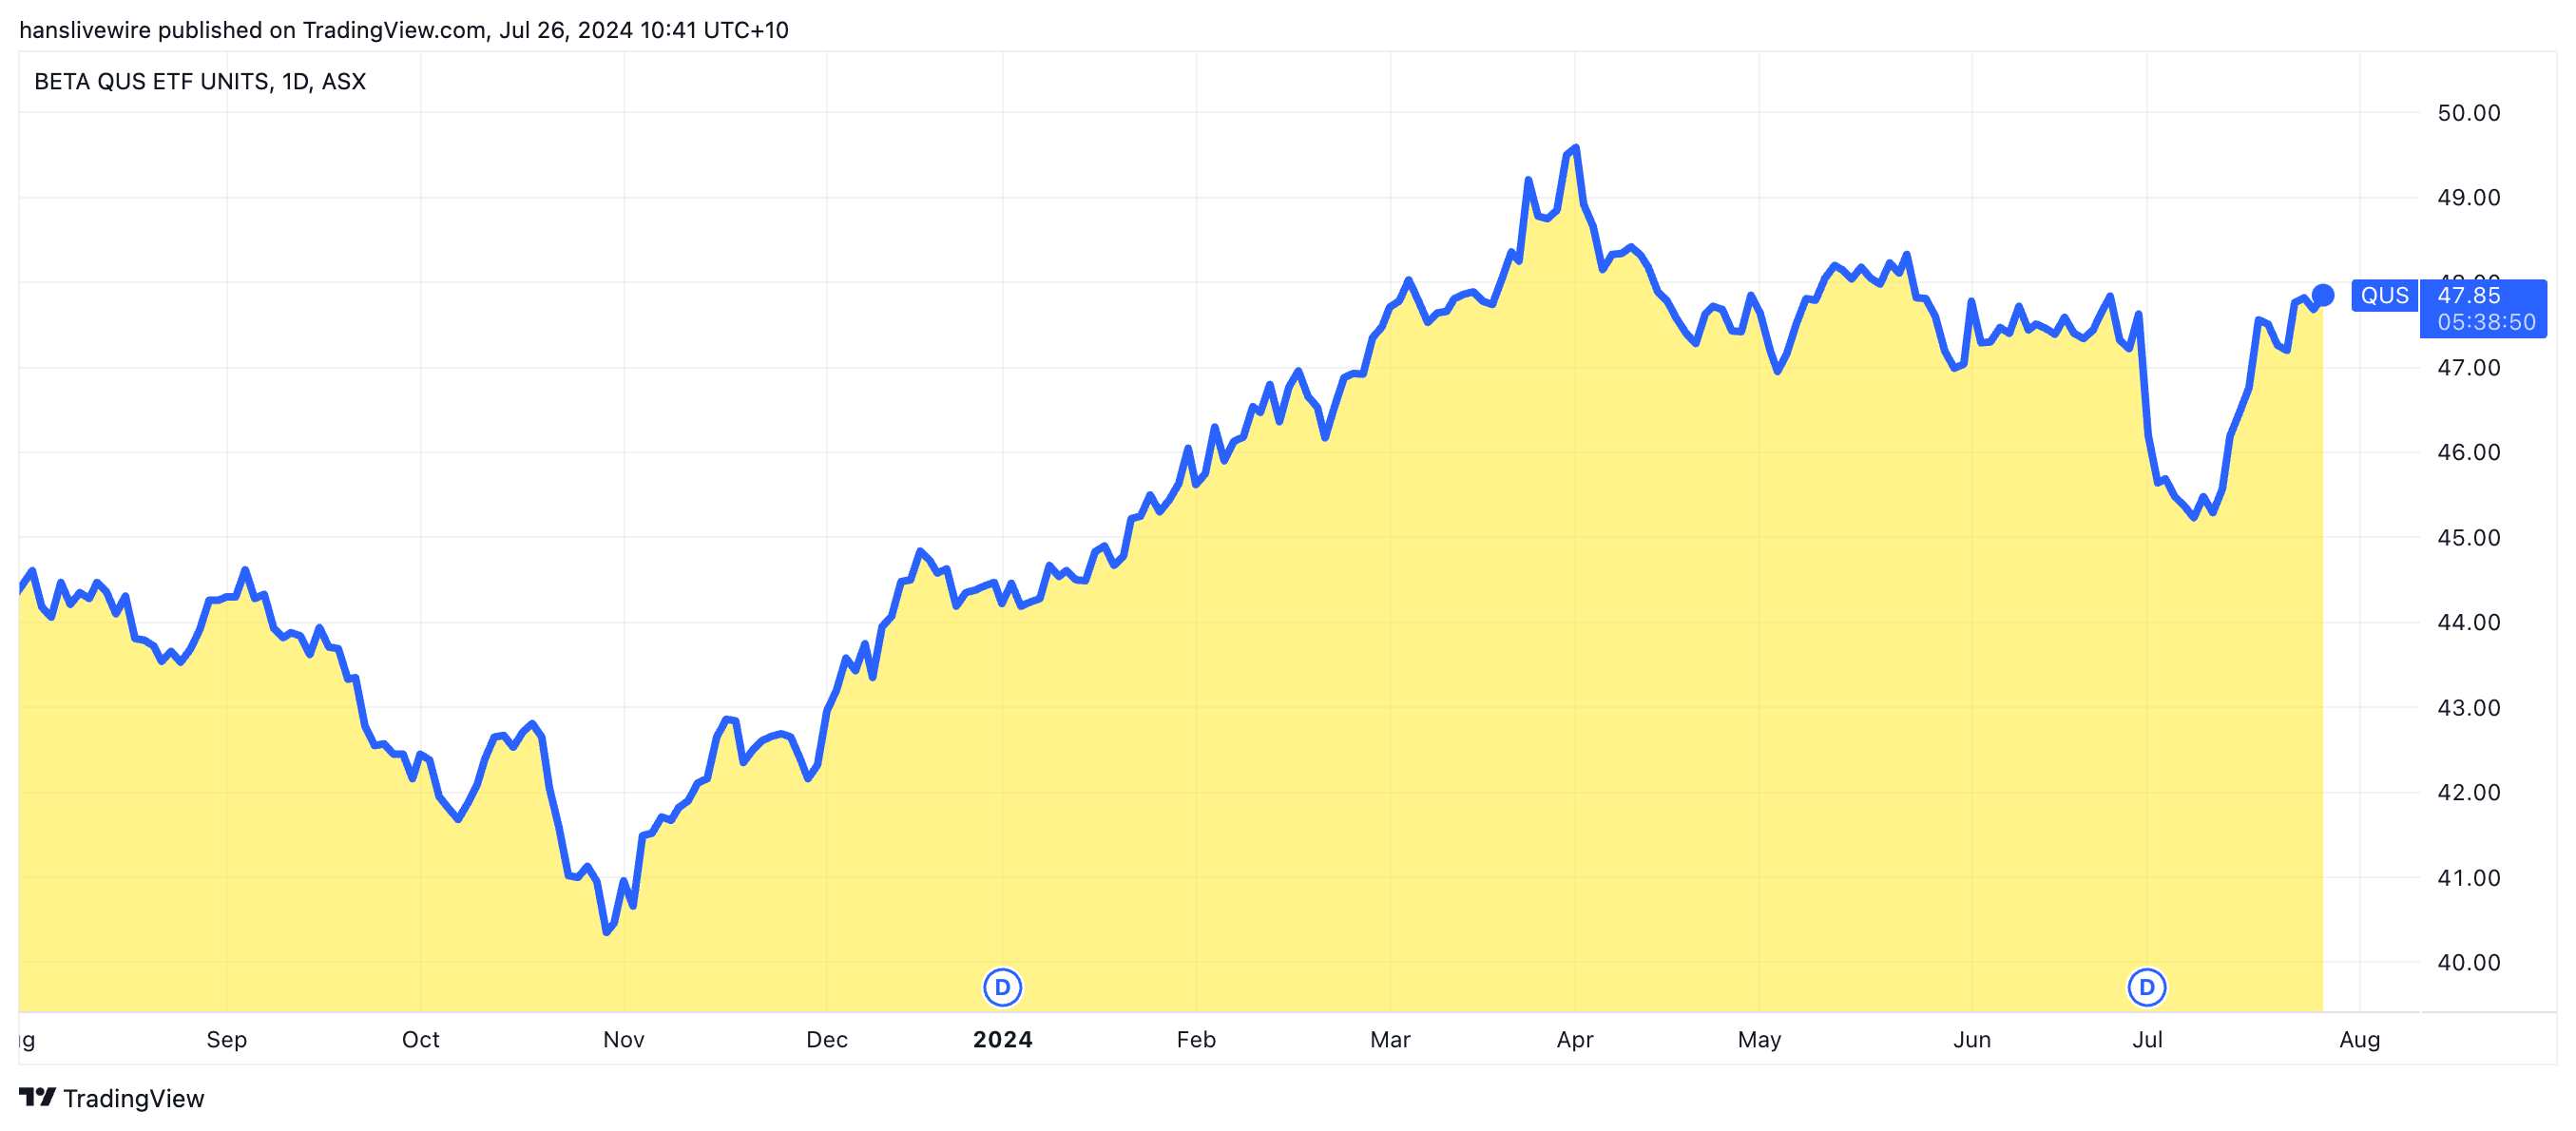 Betashares S&P 500 Equal Weight ETF performance over the last 12 months. (Source: TradingView)